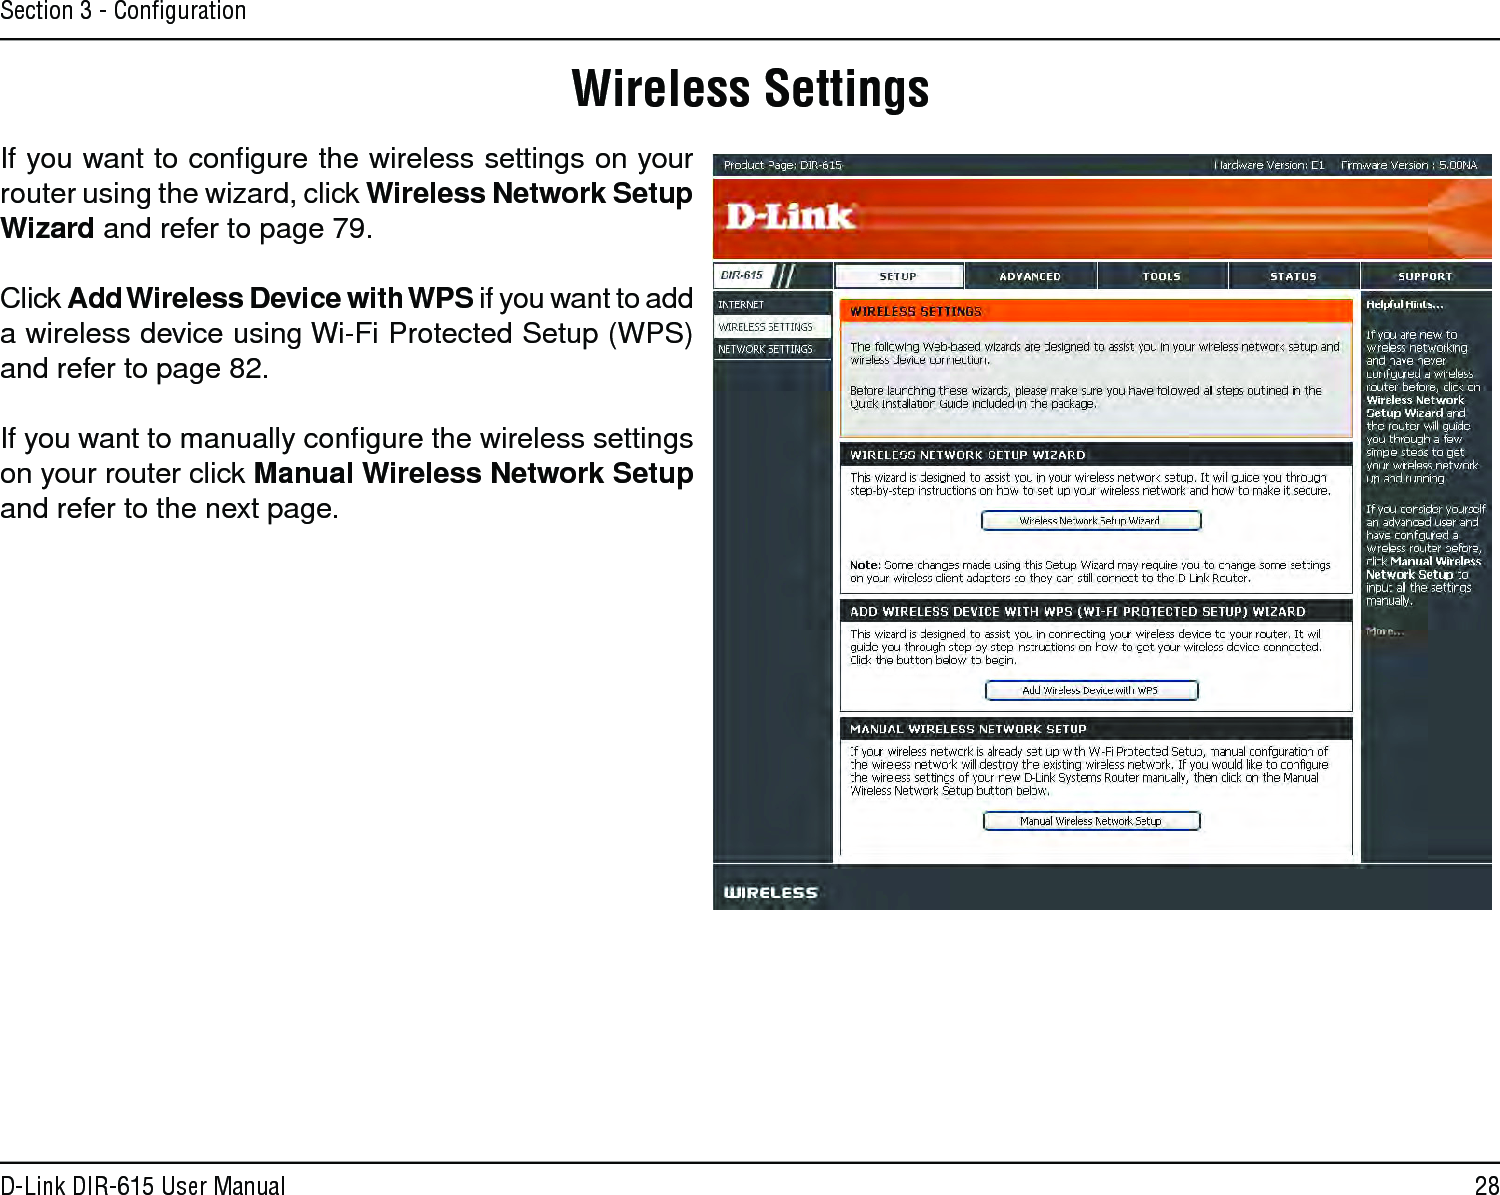 28D-Link DIR-615 User ManualSection 3 - ConﬁgurationWireless SettingsIf you want to conﬁgure the wireless settings on your router using the wizard, click Wireless Network Setup Wizard and refer to page 79.Click Add Wireless Device with WPS if you want to add a wireless device using Wi-Fi Protected Setup (WPS) and refer to page 82.If you want to manually conﬁgure the wireless settings on your router click Manual Wireless Network Setup and refer to the next page.